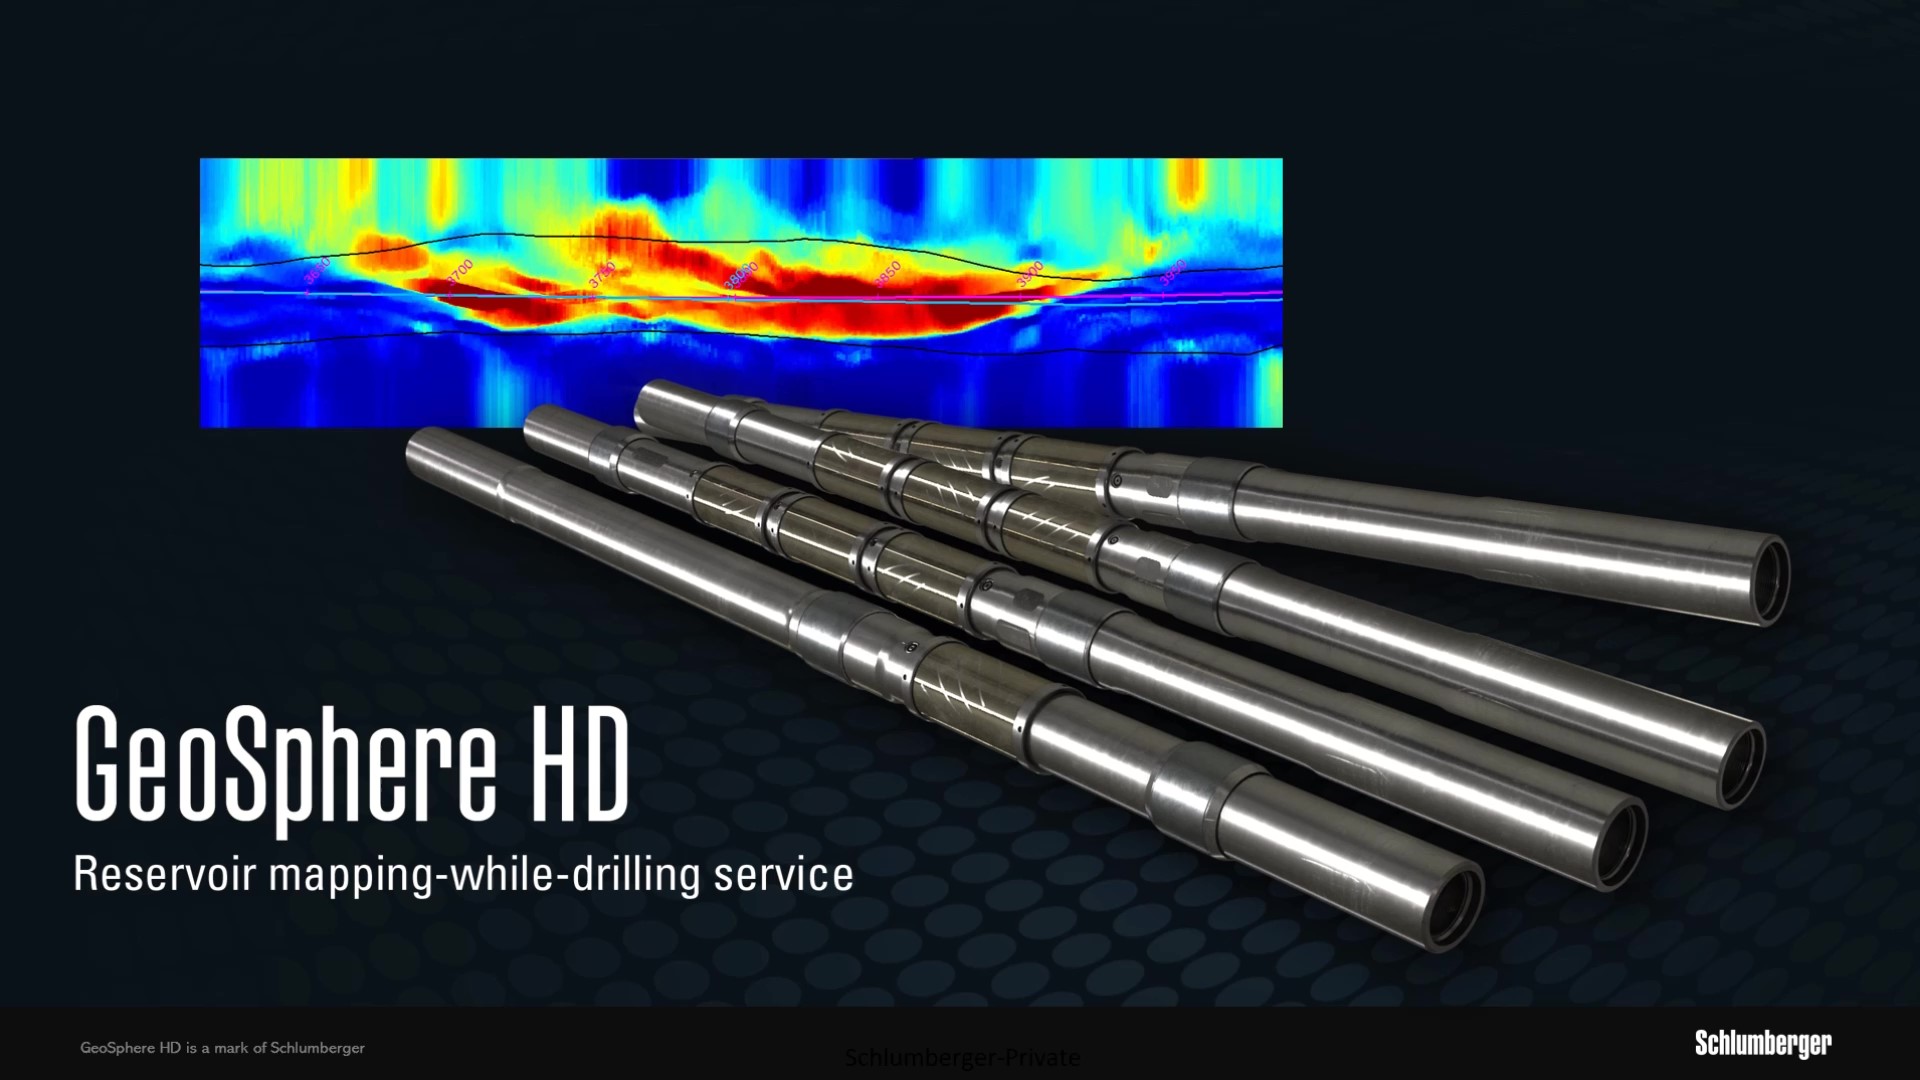 Upgraded slides for GeoSphere HD high-definition reservoir mapping-while-drilling sevice customer presentation